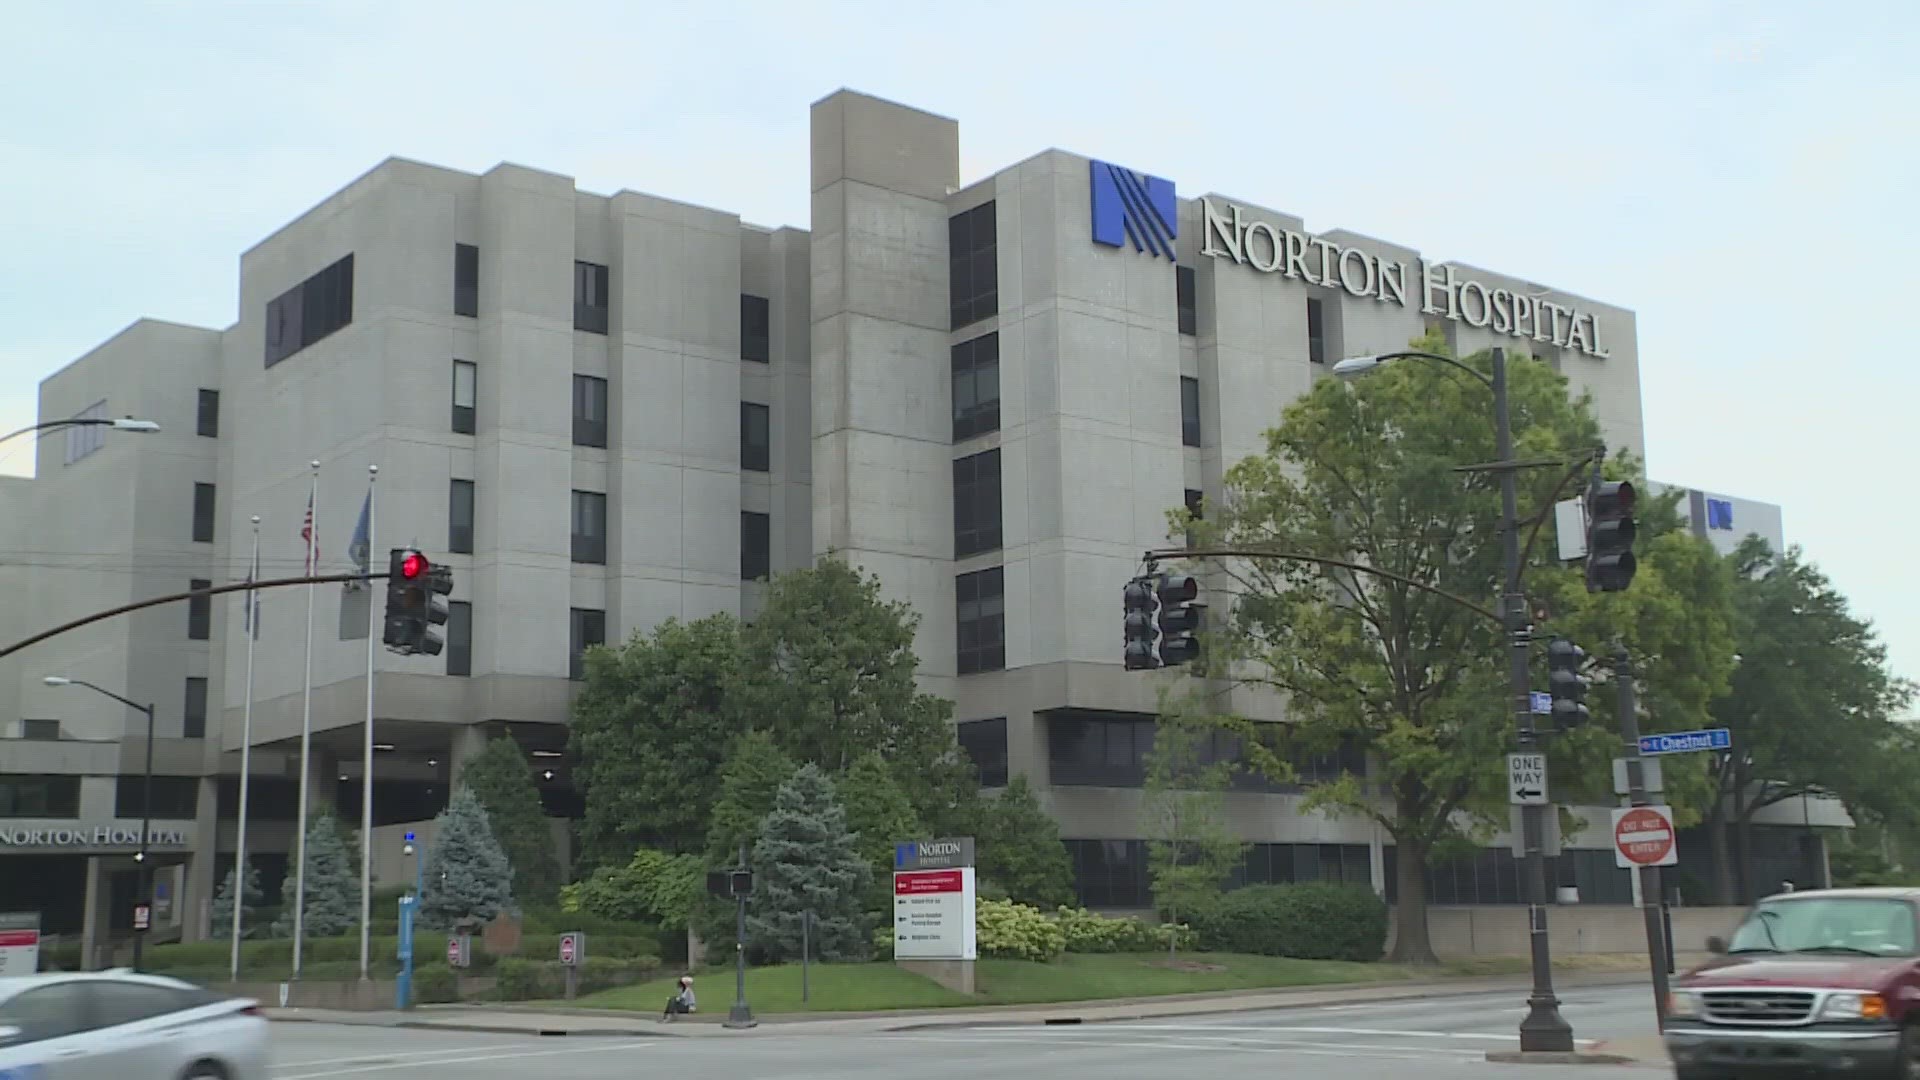 The healthcare giant said they have no evidence that unauthorized individuals gained access to Norton's medical record system or their MyChart system.